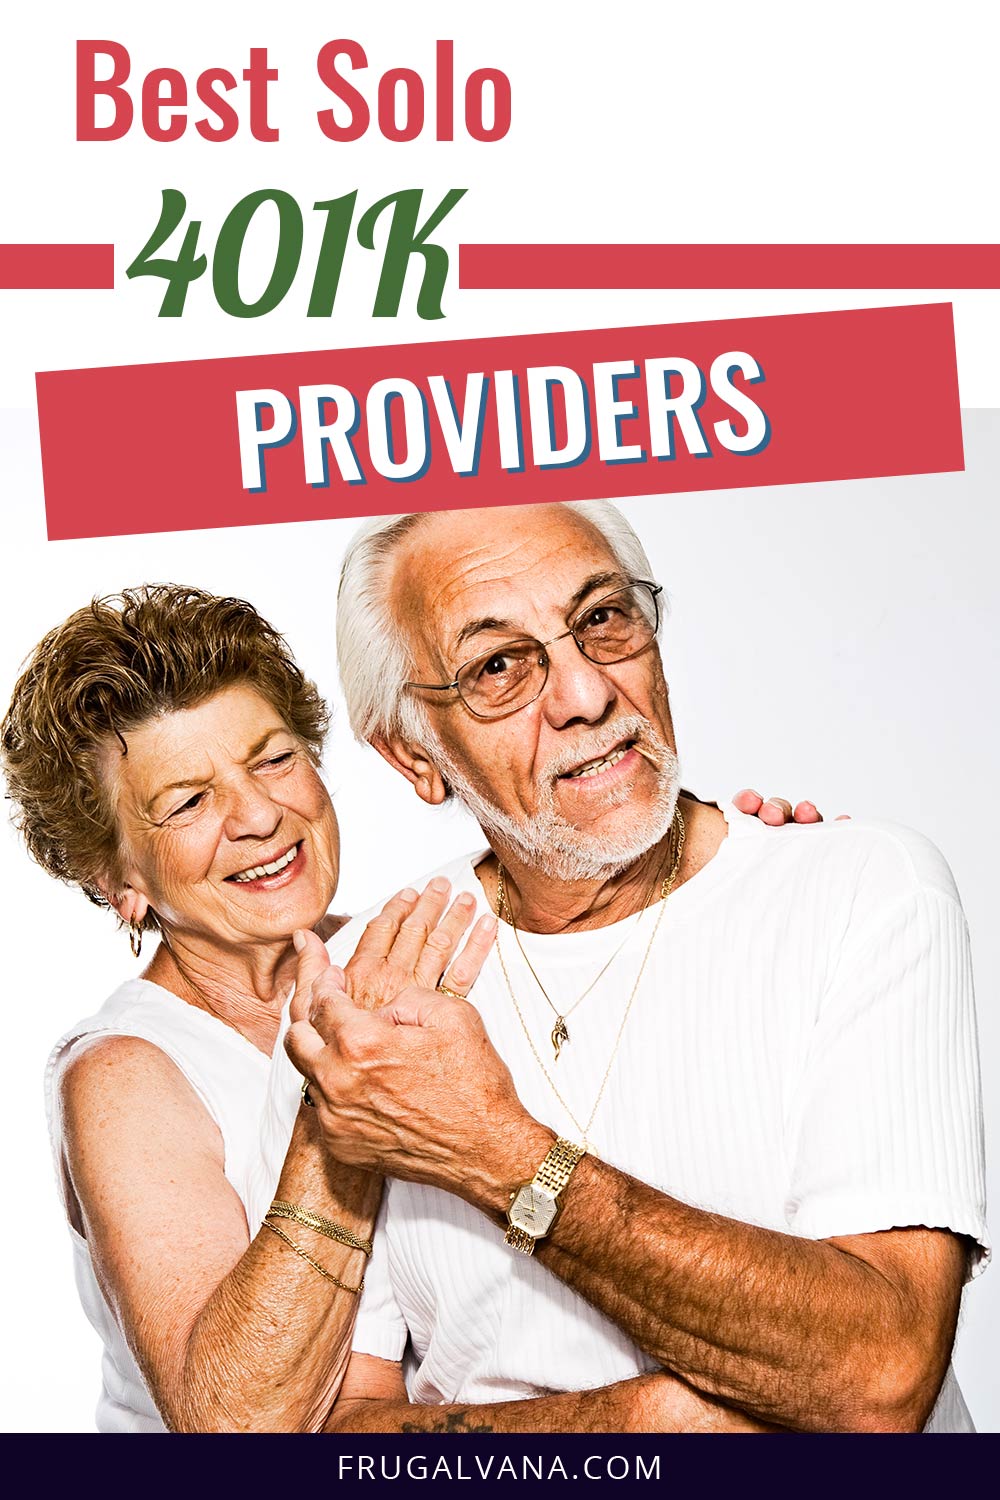 Old man and woman holding hands together - Best Solo 401K Providers